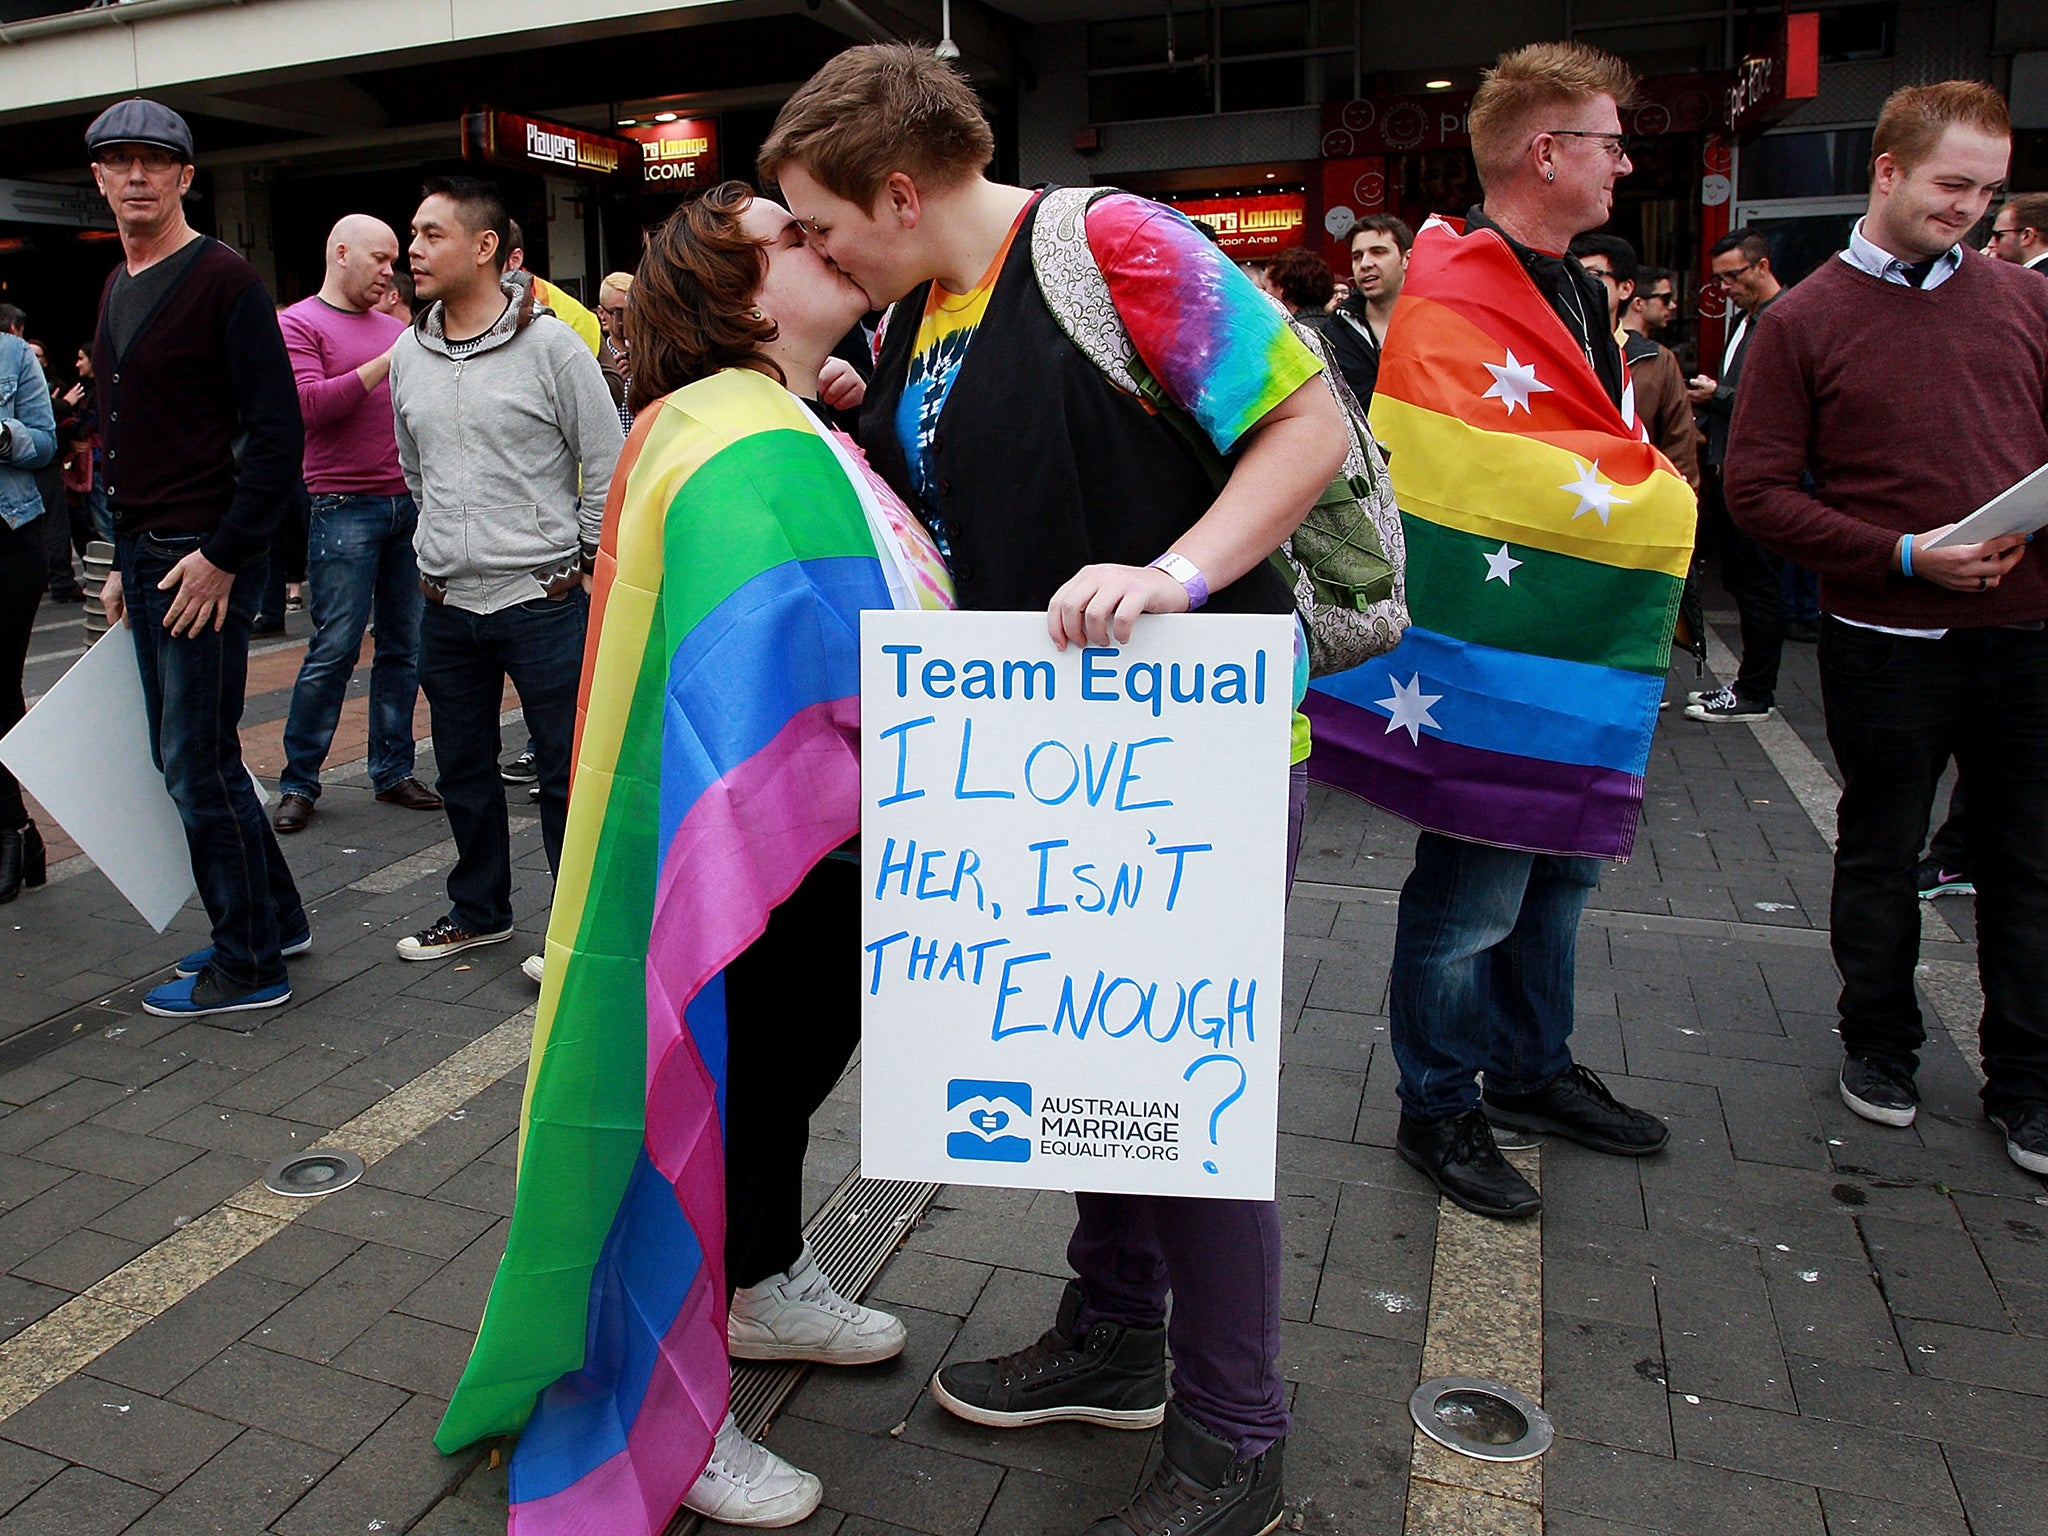 Demonstrators in Sydney kiss during the rally in support of equal marriage